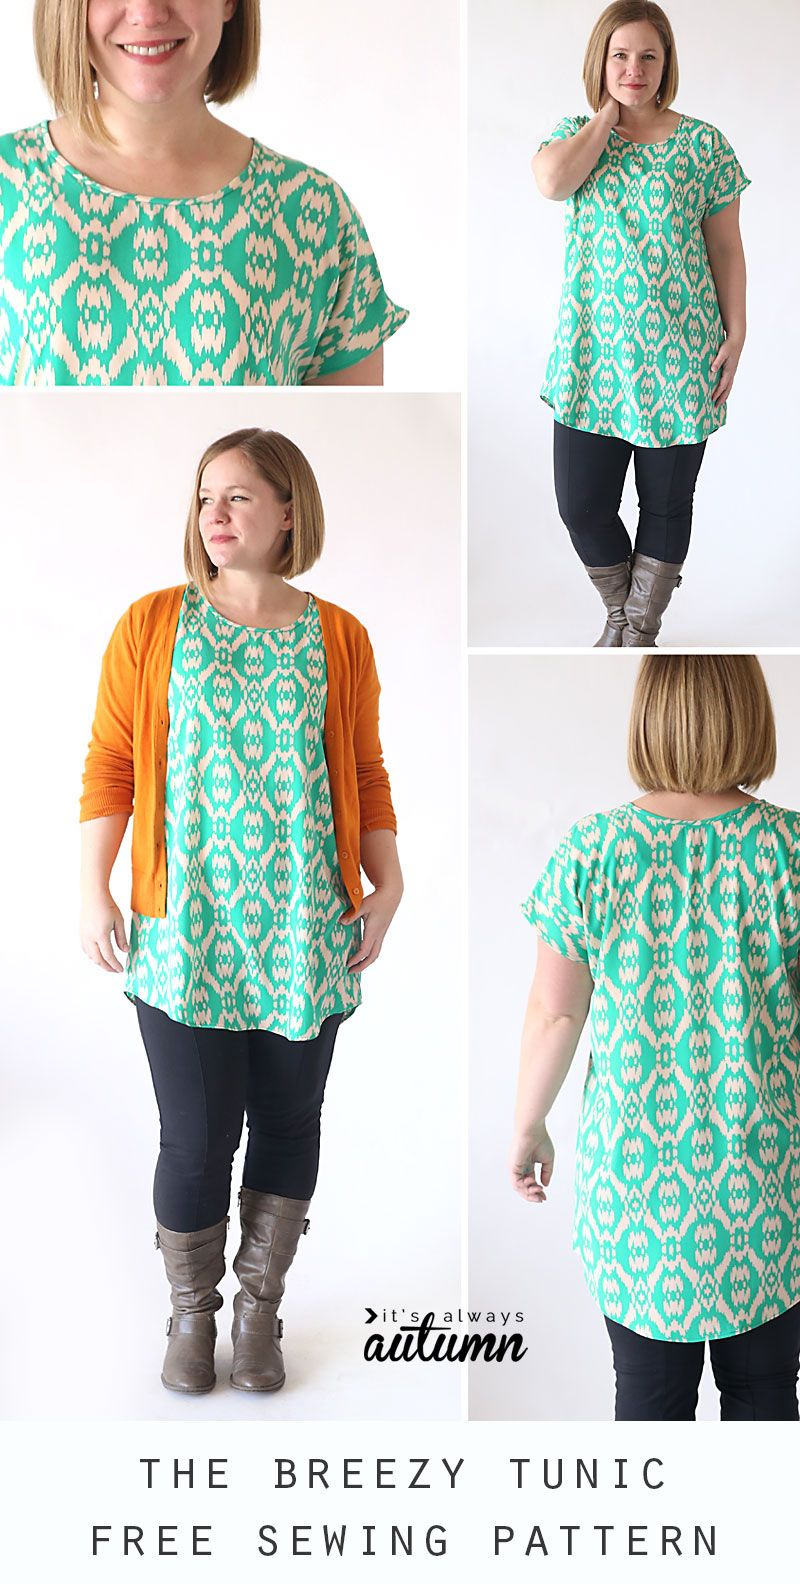 Easy Blouse Sewing Pattern The Breezy Tee Tunic Sewing Pinterest Sewing Sewing Patterns